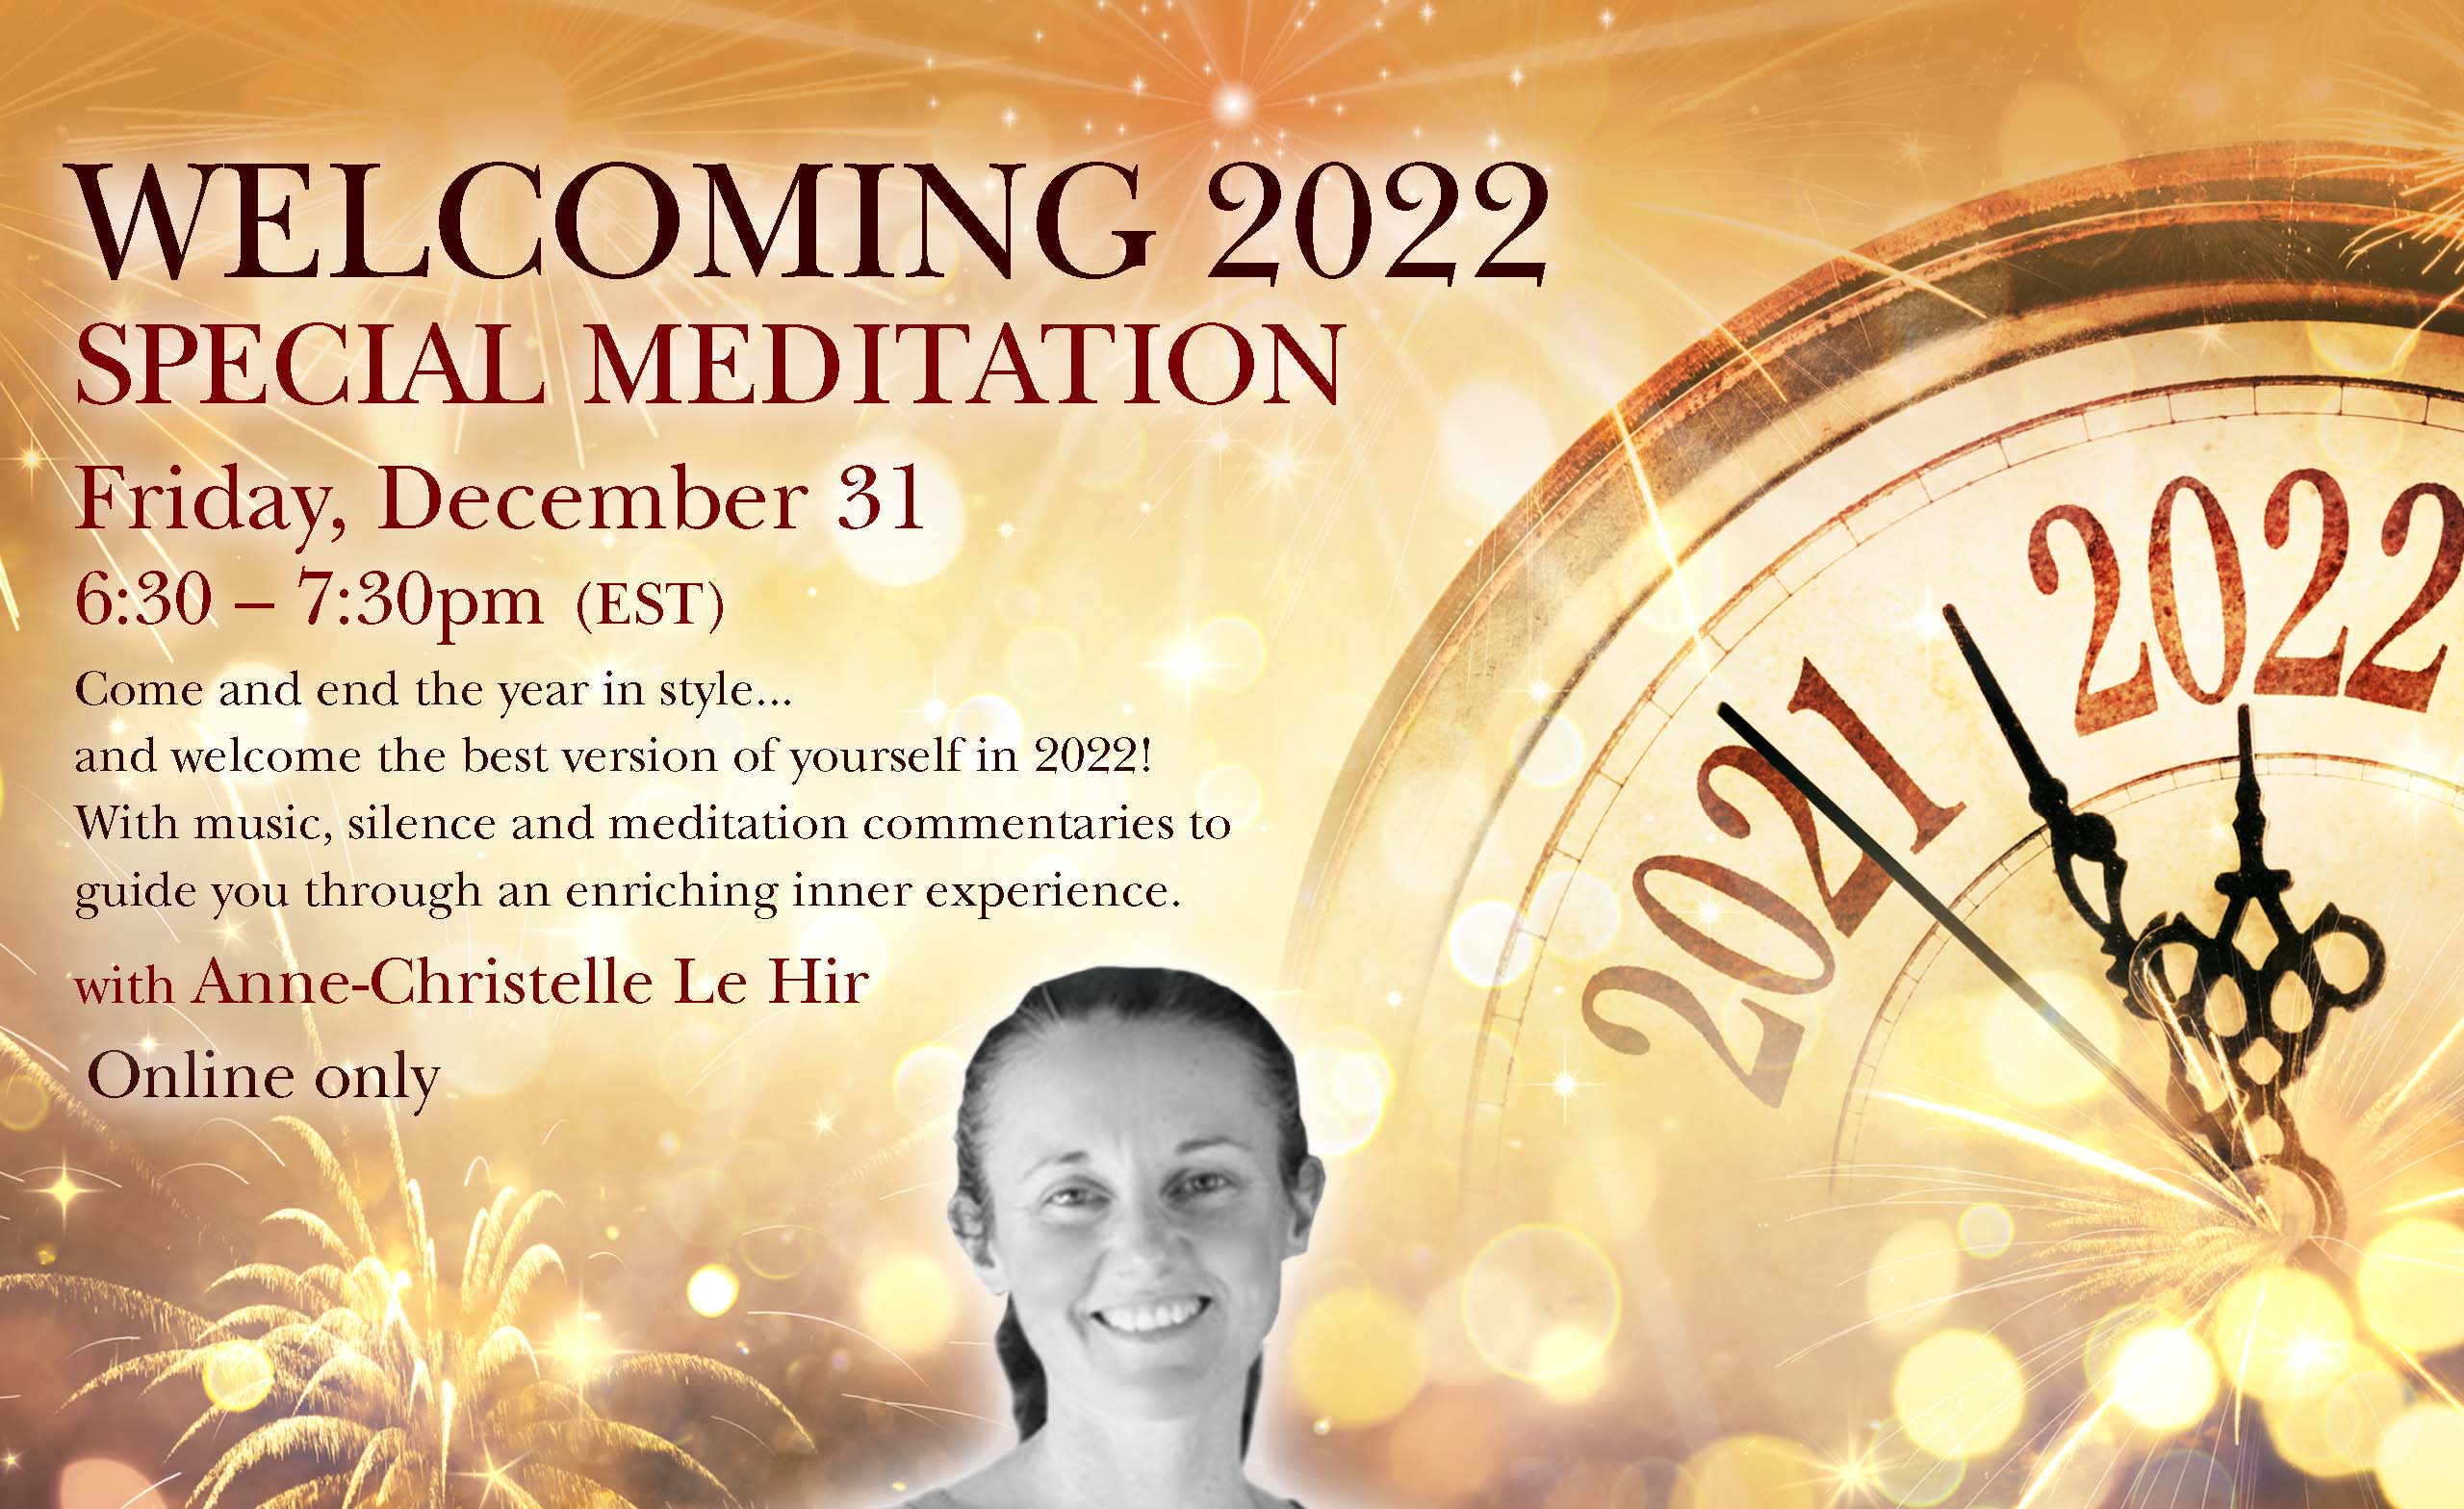 WELCOMING 2022 Special Meditation